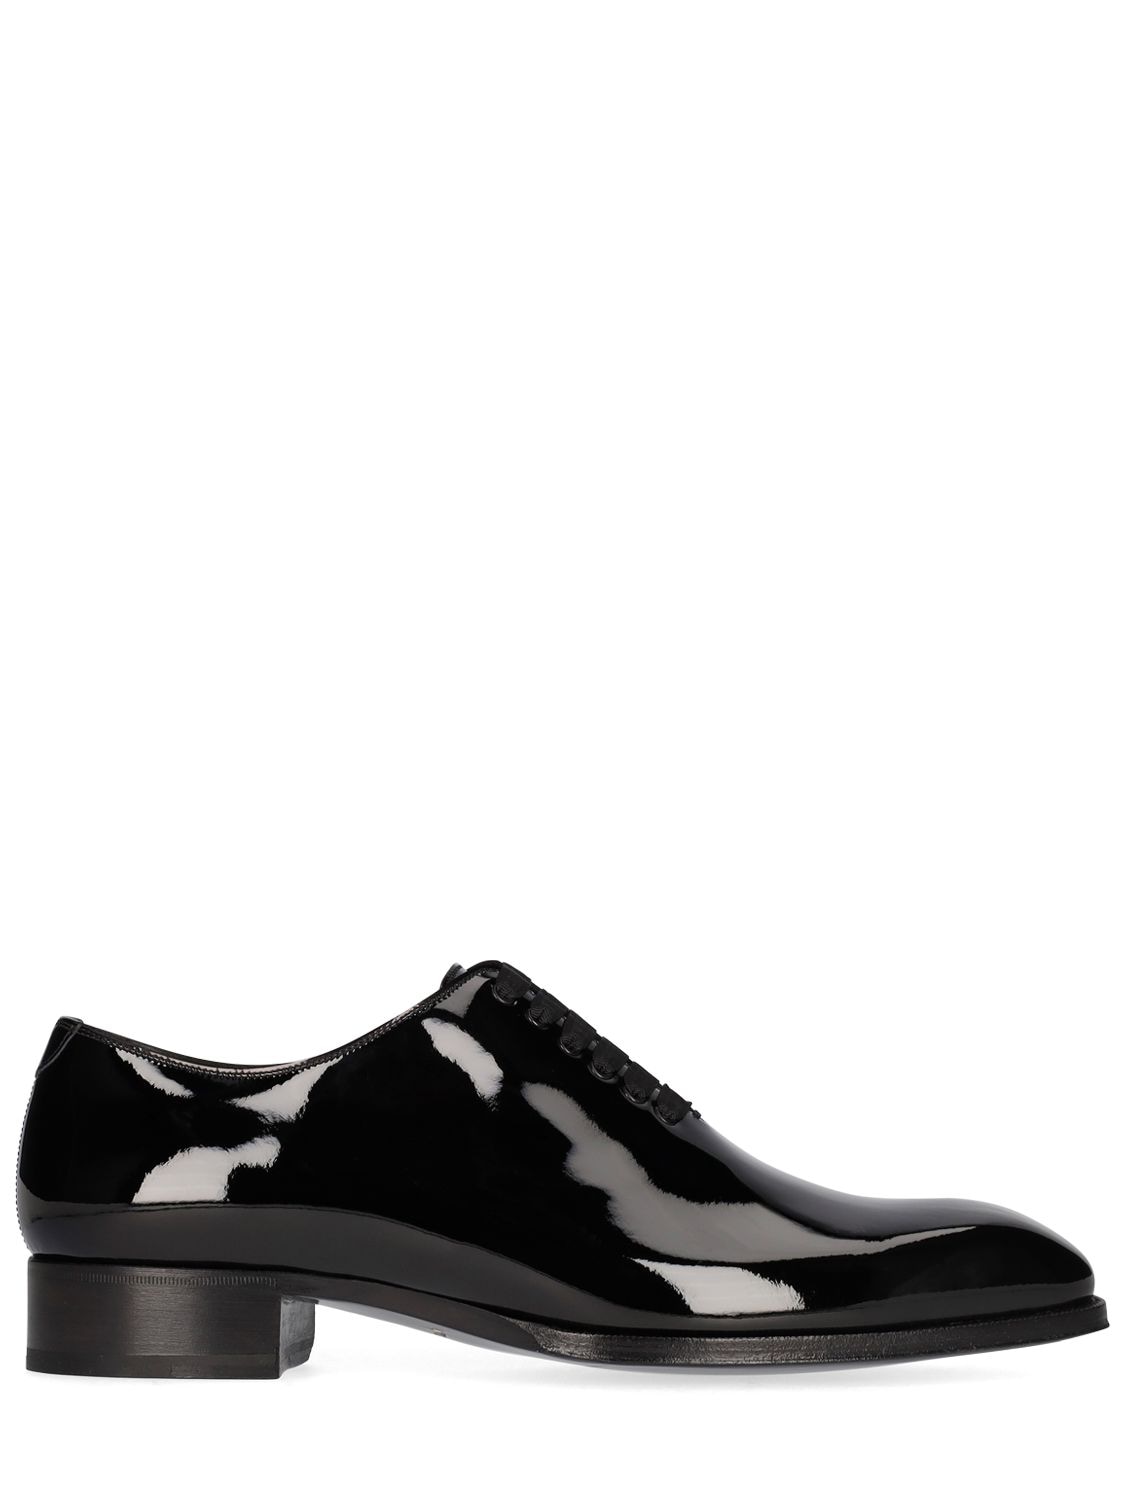 TOM FORD 27MM ELKAN EVENING LEATHER LACE-UP SHOES